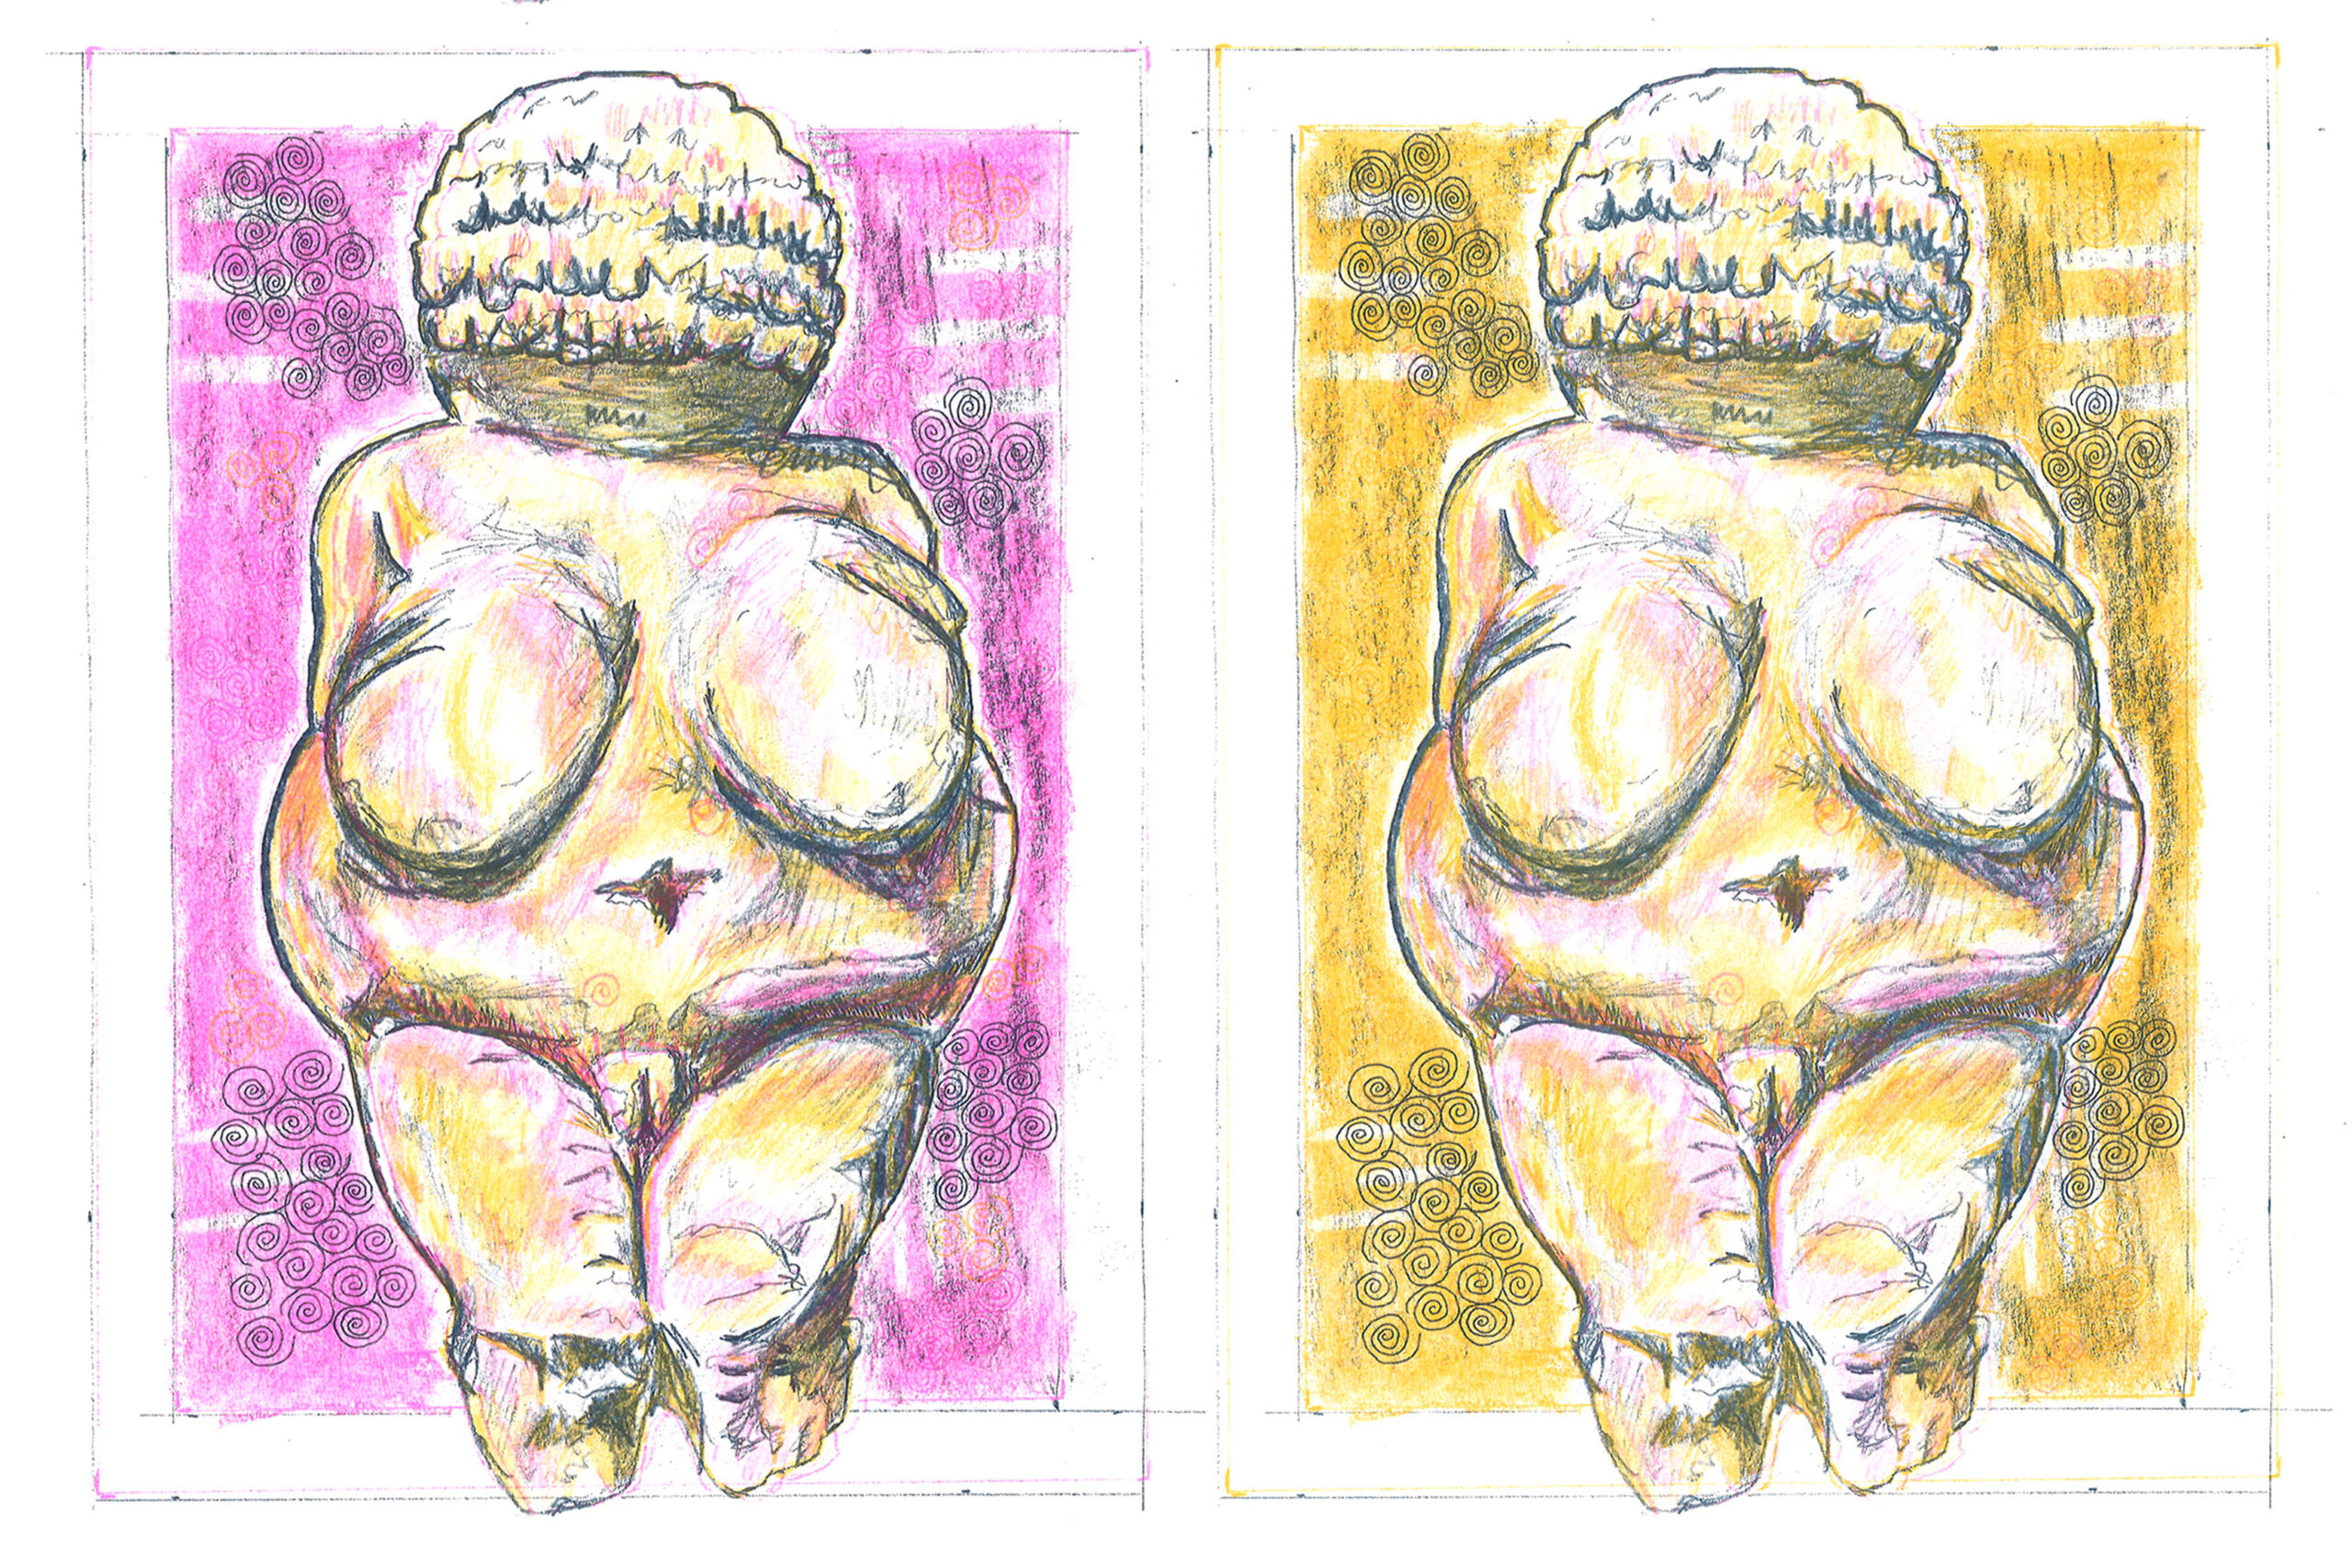 Two risograph prints of the "Venus of Willendorf" figure are shown in a grid. They are printed in a range of colors: purple, blue, magenta, and yellow. 